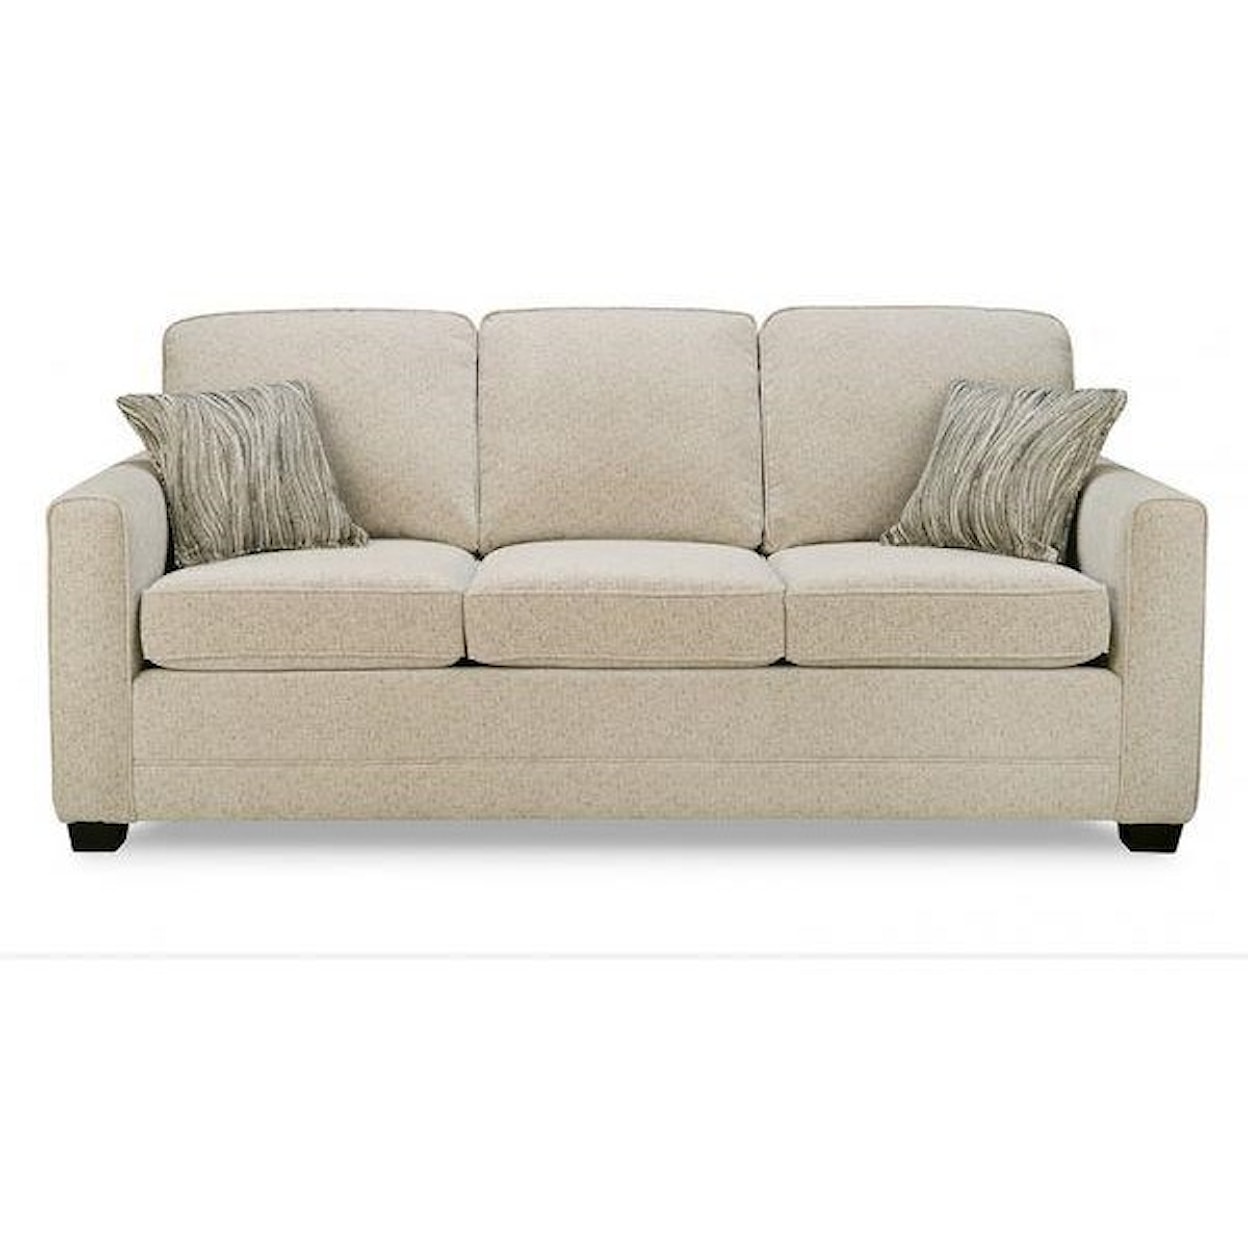 Superstyle 1014 Trinity Queen Sofabed